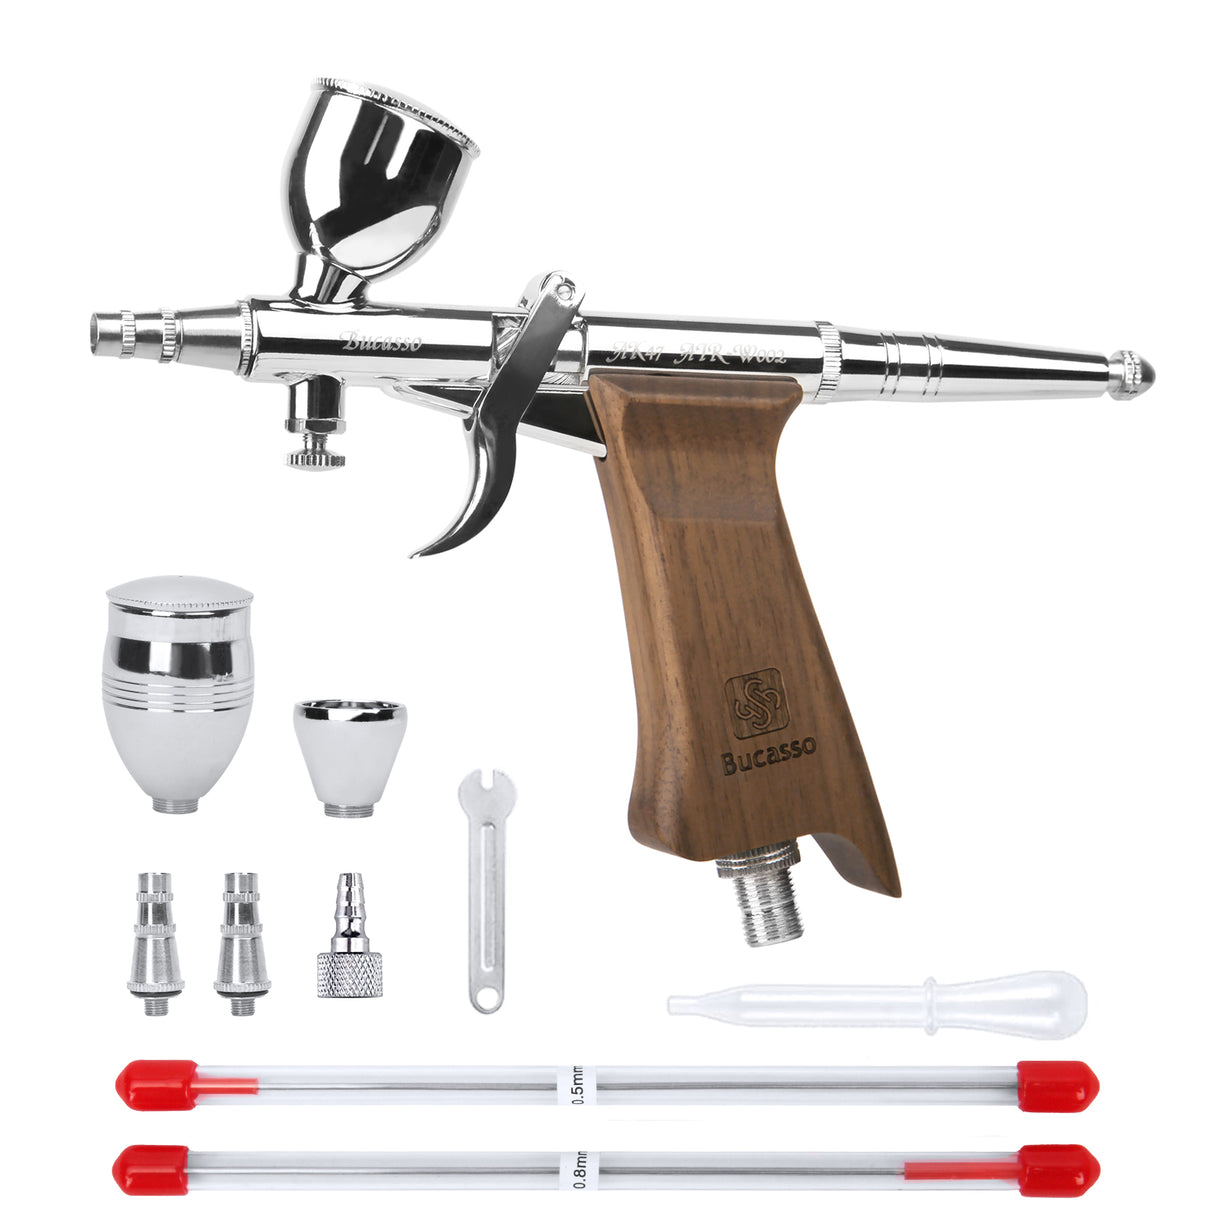 Bucasso Airbrush Kit, Air Brush Spray Gun with 0.3mm/0.5mm/0.8mm Needles/Nozzle Sets, 3cc/7cc/11cc Replaceable Fluid Cup for Painting Model Nails Cake Tattoo Makeup (Walnut)